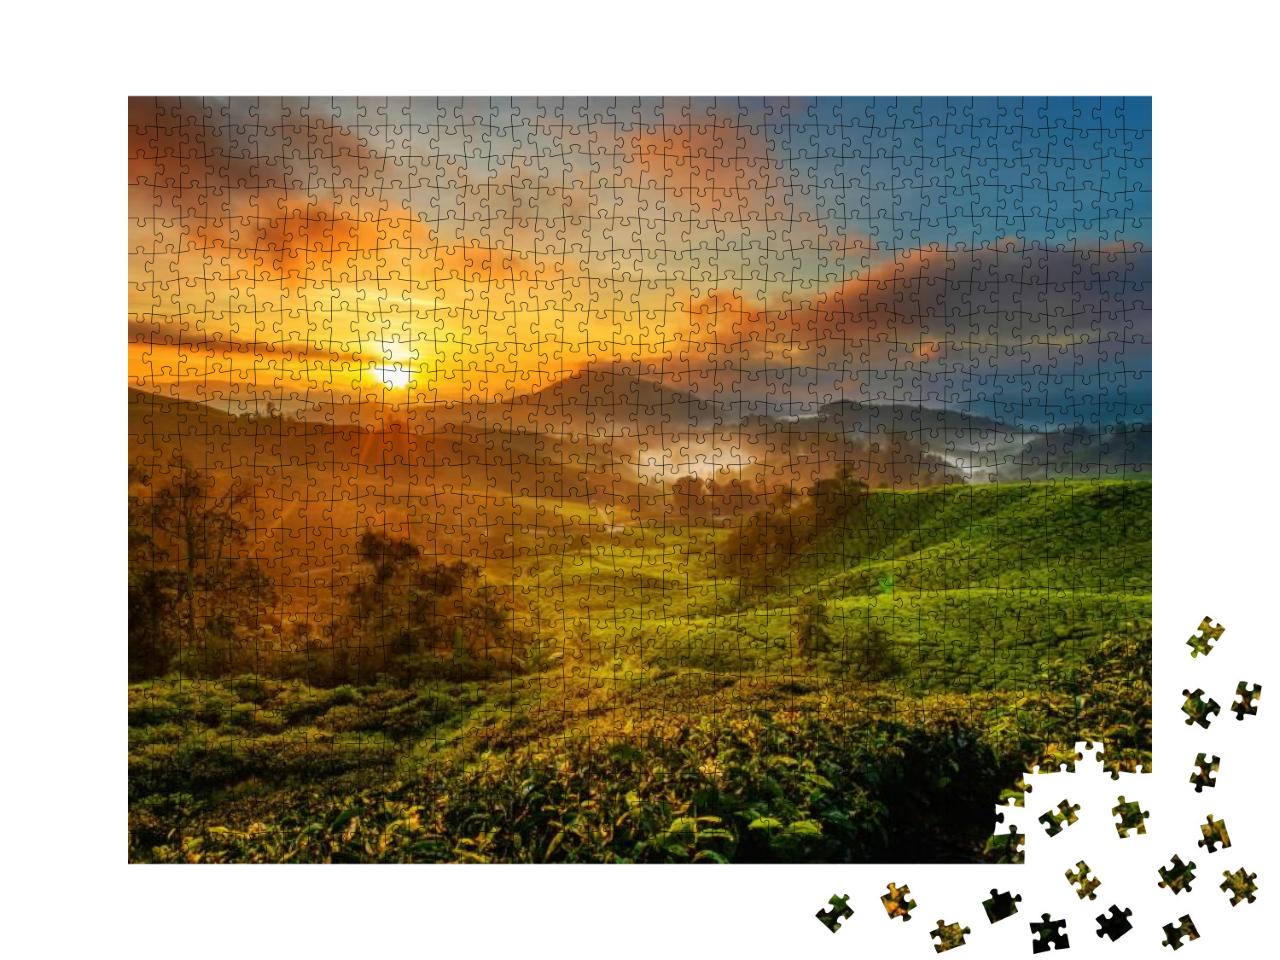 Sunrise View of Tea Plantation Landscape At Cameron Highl... Jigsaw Puzzle with 1000 pieces